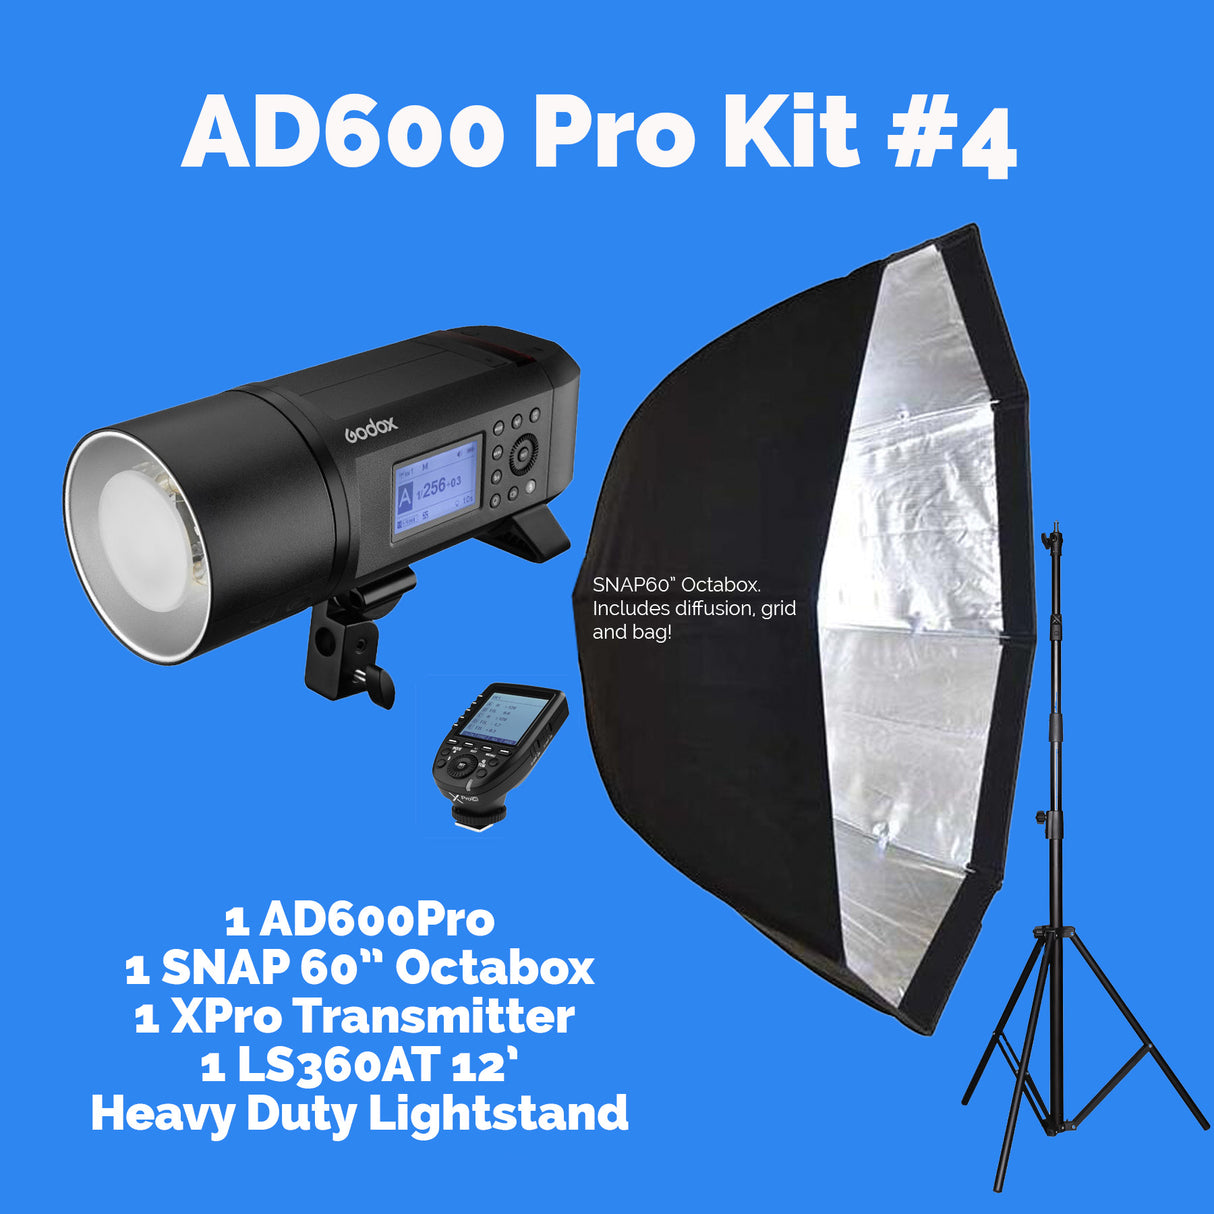 AD600Pro Kit #4 with SNAP60